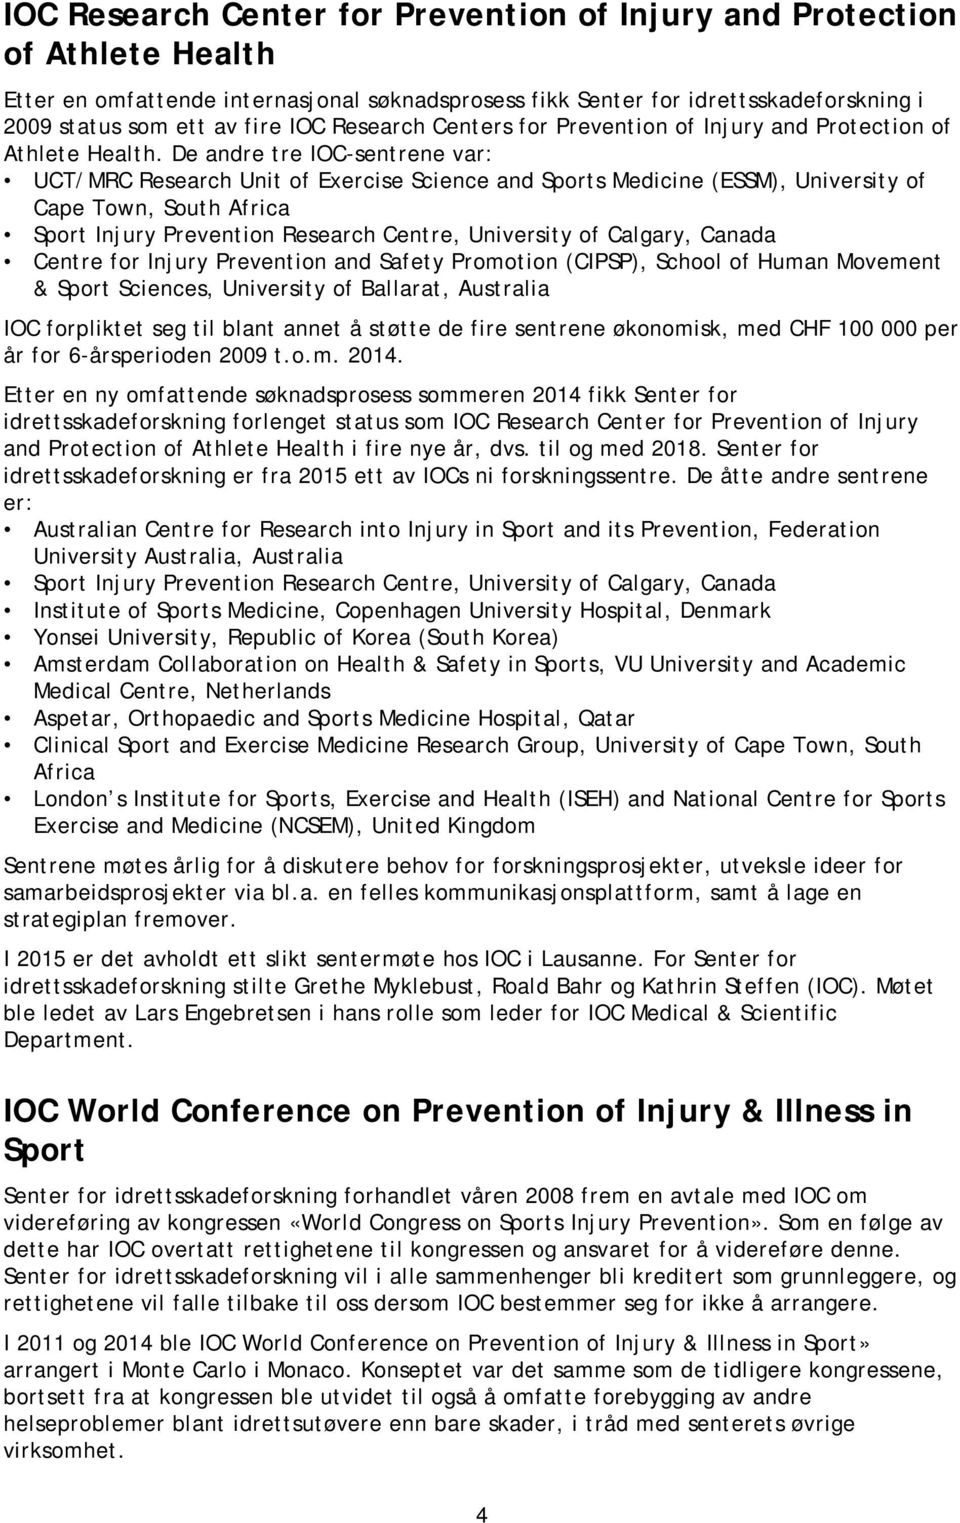 De andre tre IOC-sentrene var: UCT/MRC Research Unit of Exercise Science and Sports Medicine (ESSM), University of Cape Town, South Africa Sport Injury Prevention Research Centre, University of